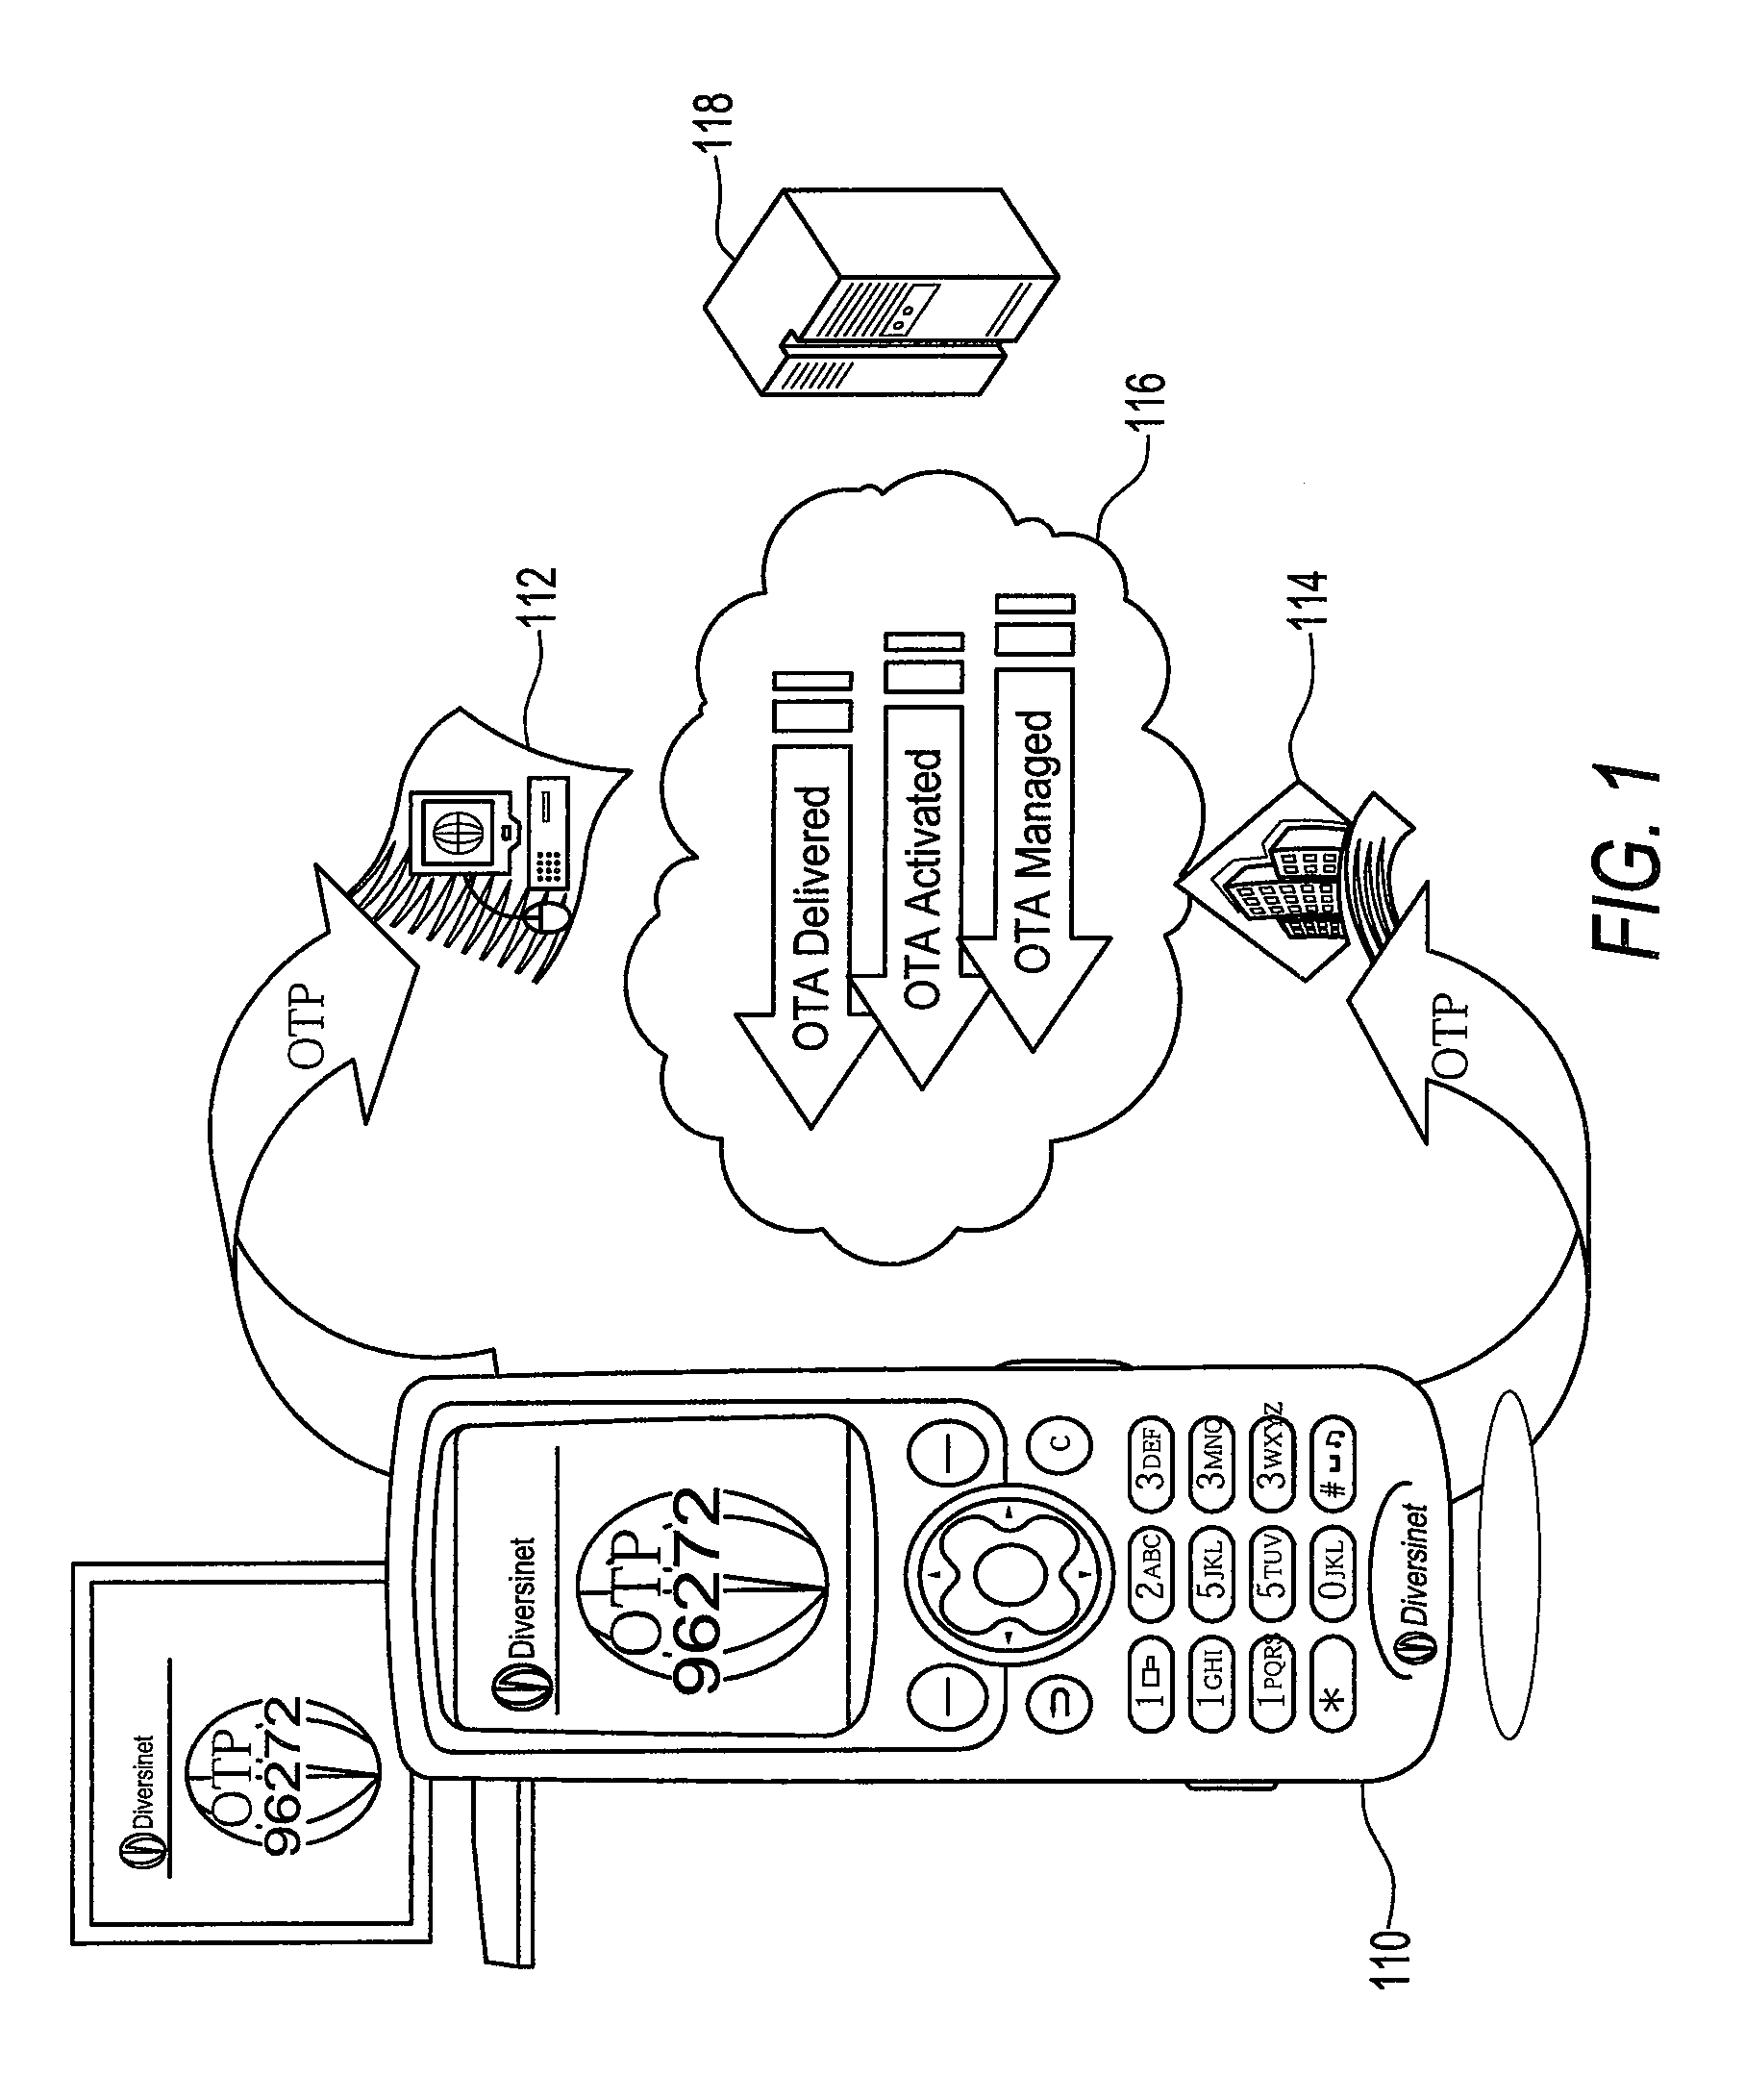 Secure identity and personal information storage and transfer